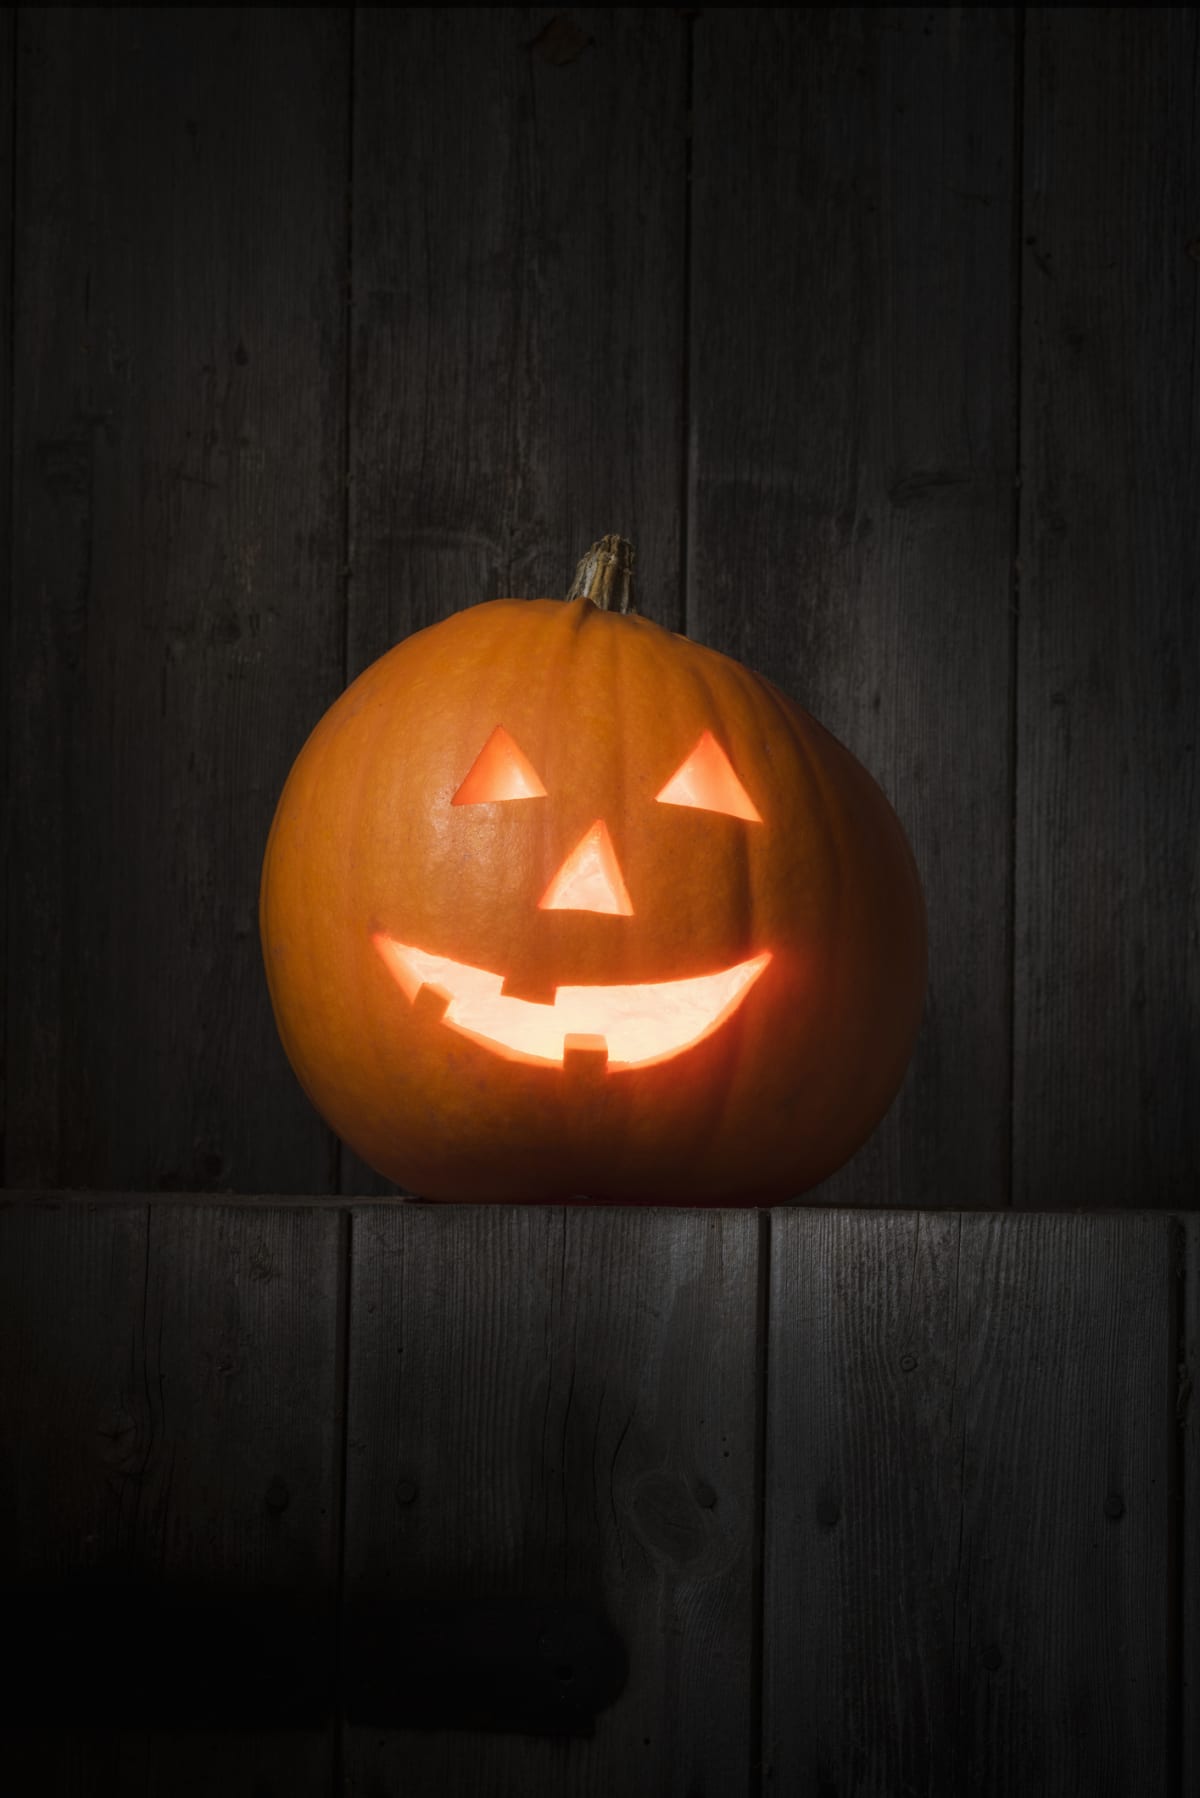 Pumpkin with carved smiling face emitting light